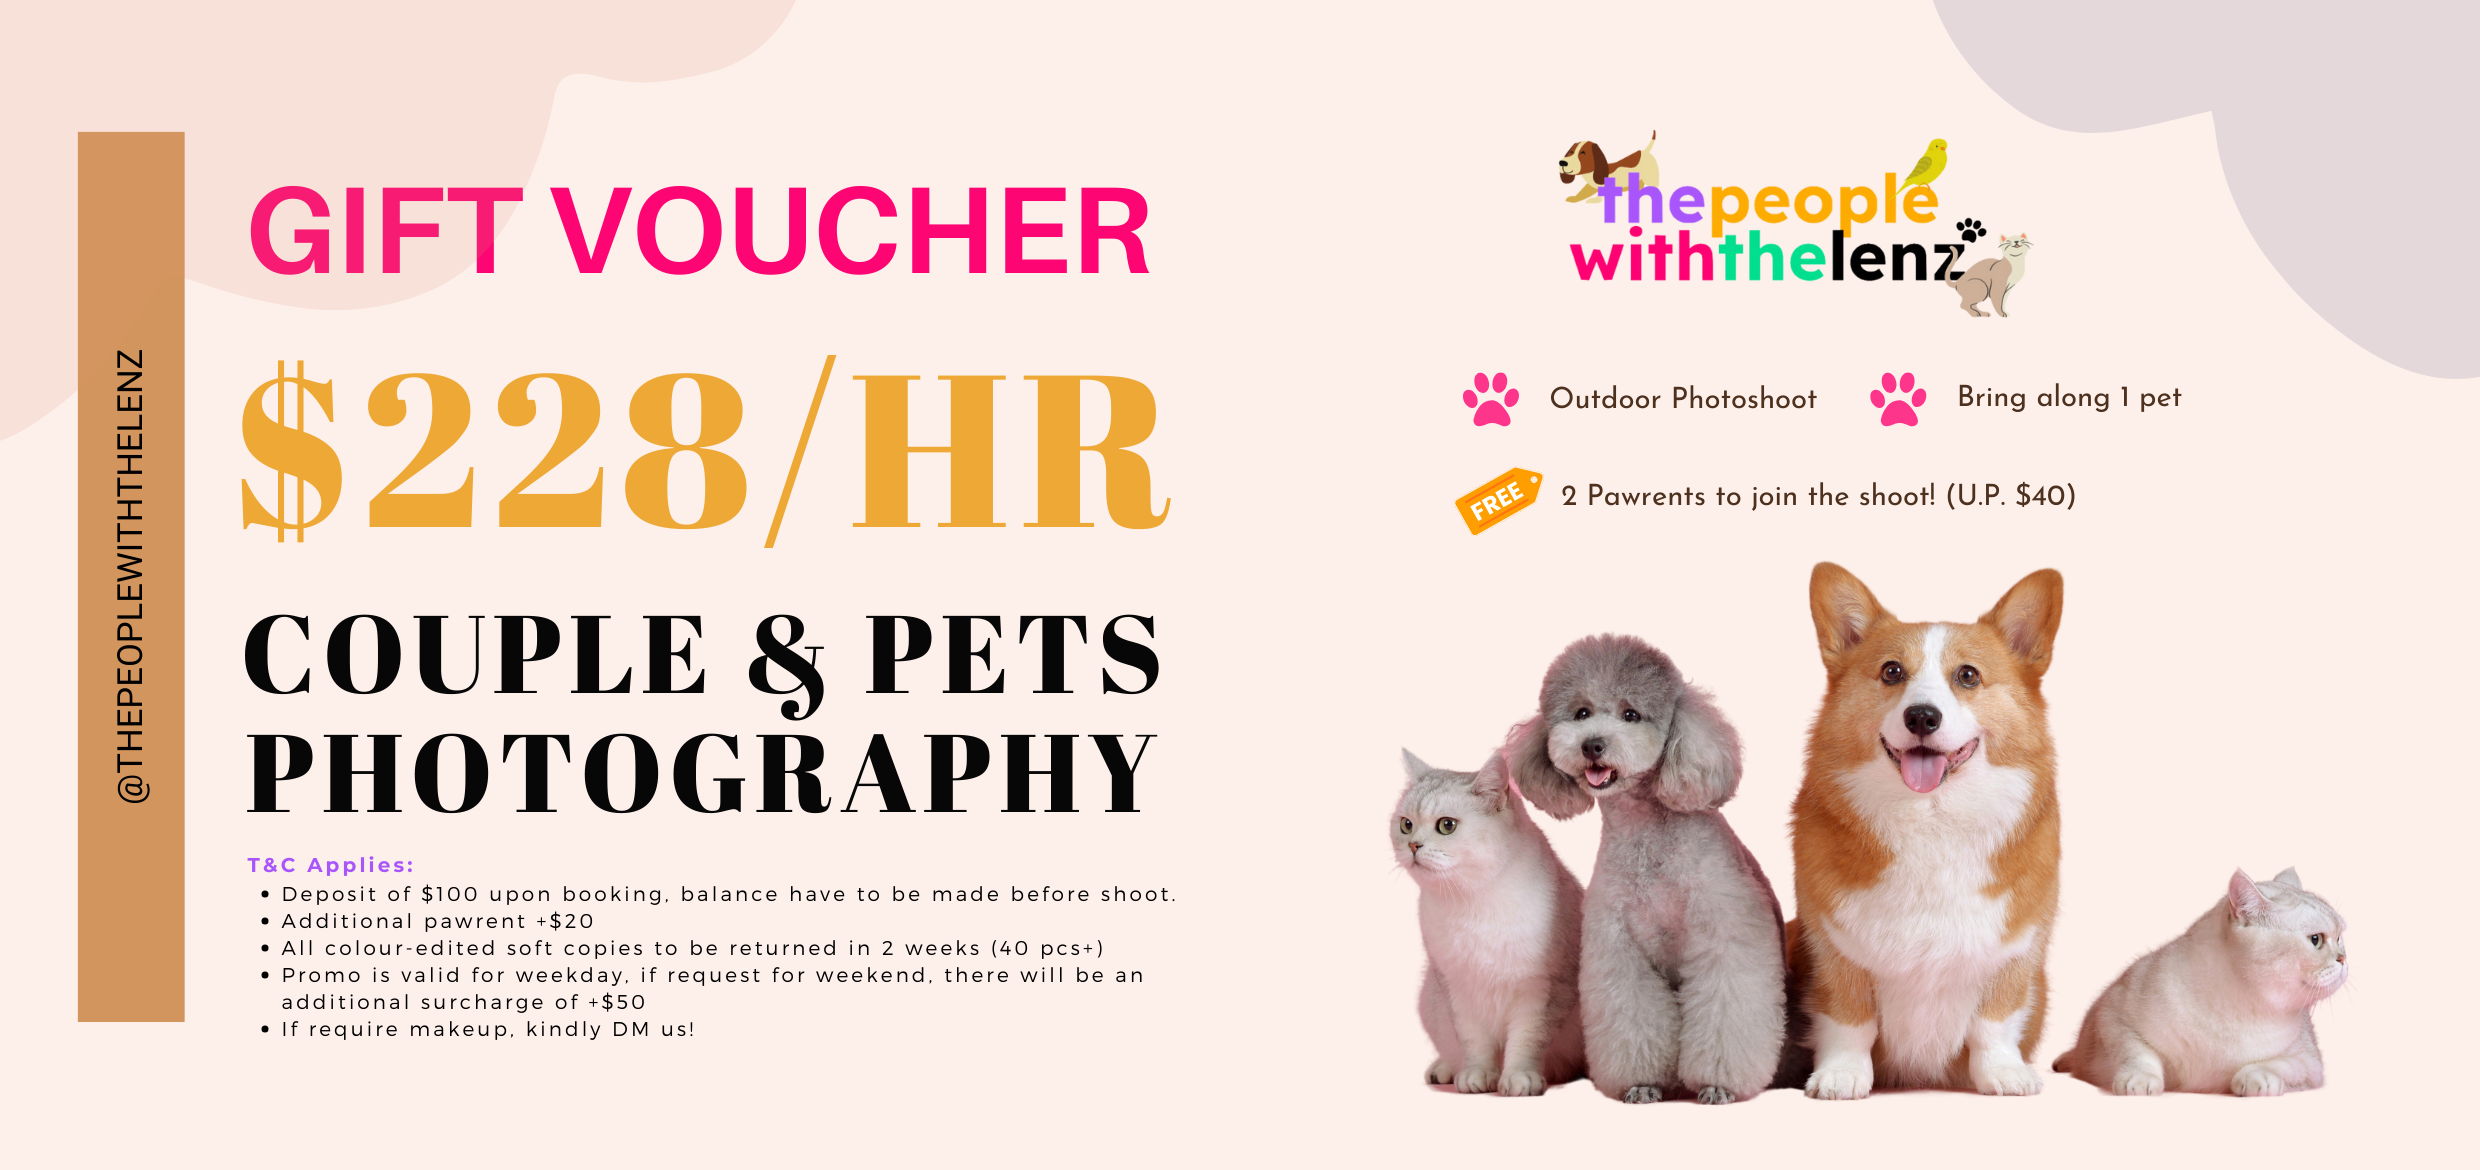 🐾 Get a PAW-SOME Steal Deal This Season! Capture and immortalise memories with your furbaby at an amazing offer!

🐕 $228/ hour Couple & Pets Photography 🐈
And more, grab the set of offer just for you 🎀🐩

✨ Full Outdoor Photoshoot
✨ Bring Along 1 Furbaby
🎁 Complimentary 2 Pawrents To Join The Shoot

T&C Applies*

Hurry DM to check out more 📌🎀